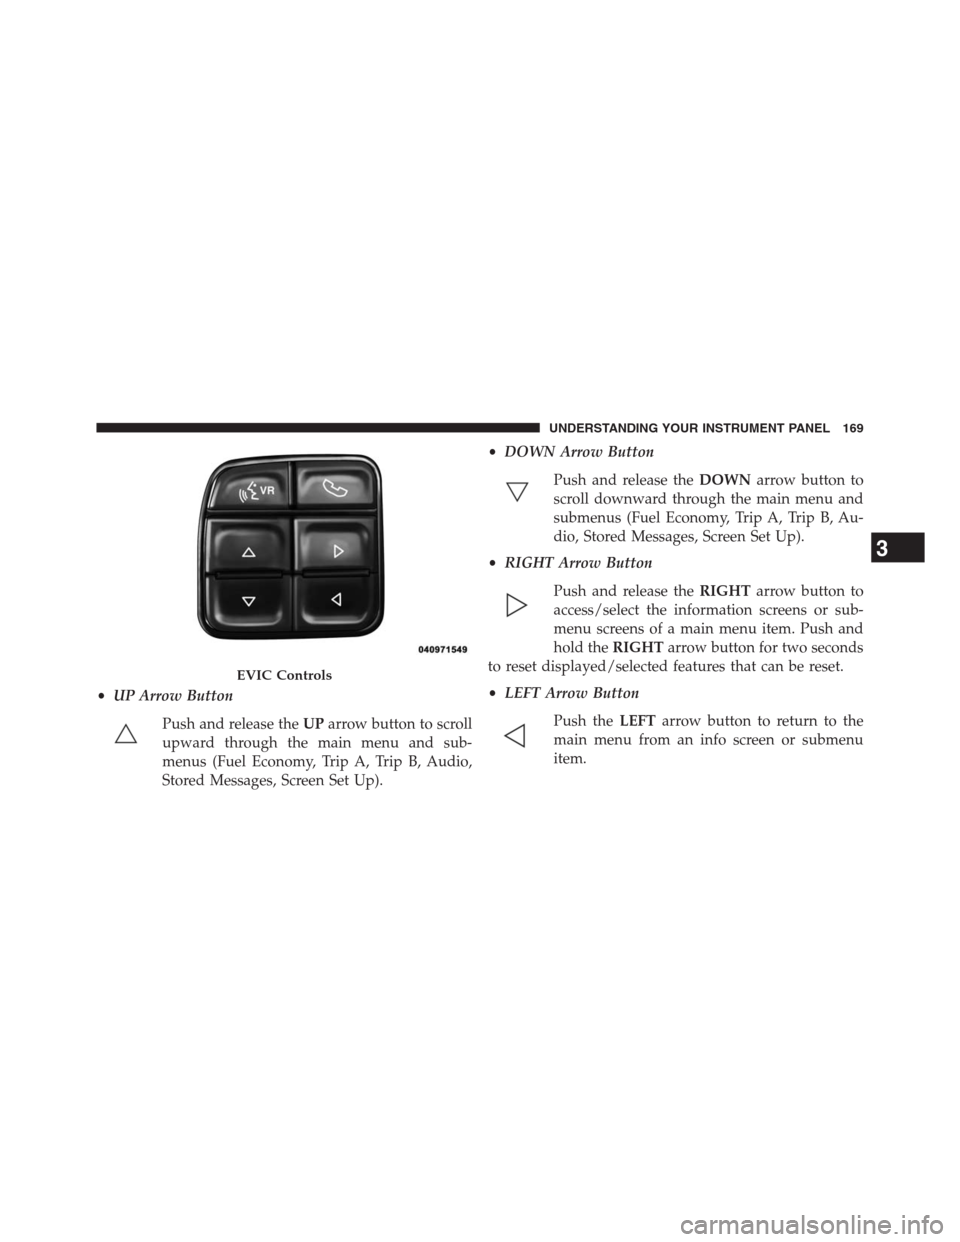 Ram 3500 2014  Diesel Supplement •UP Arrow Button
Push and release theUParrow button to scroll
upward through the main menu and sub-
menus (Fuel Economy, Trip A, Trip B, Audio,
Stored Messages, Screen Set Up).•DOWN Arrow Button
P